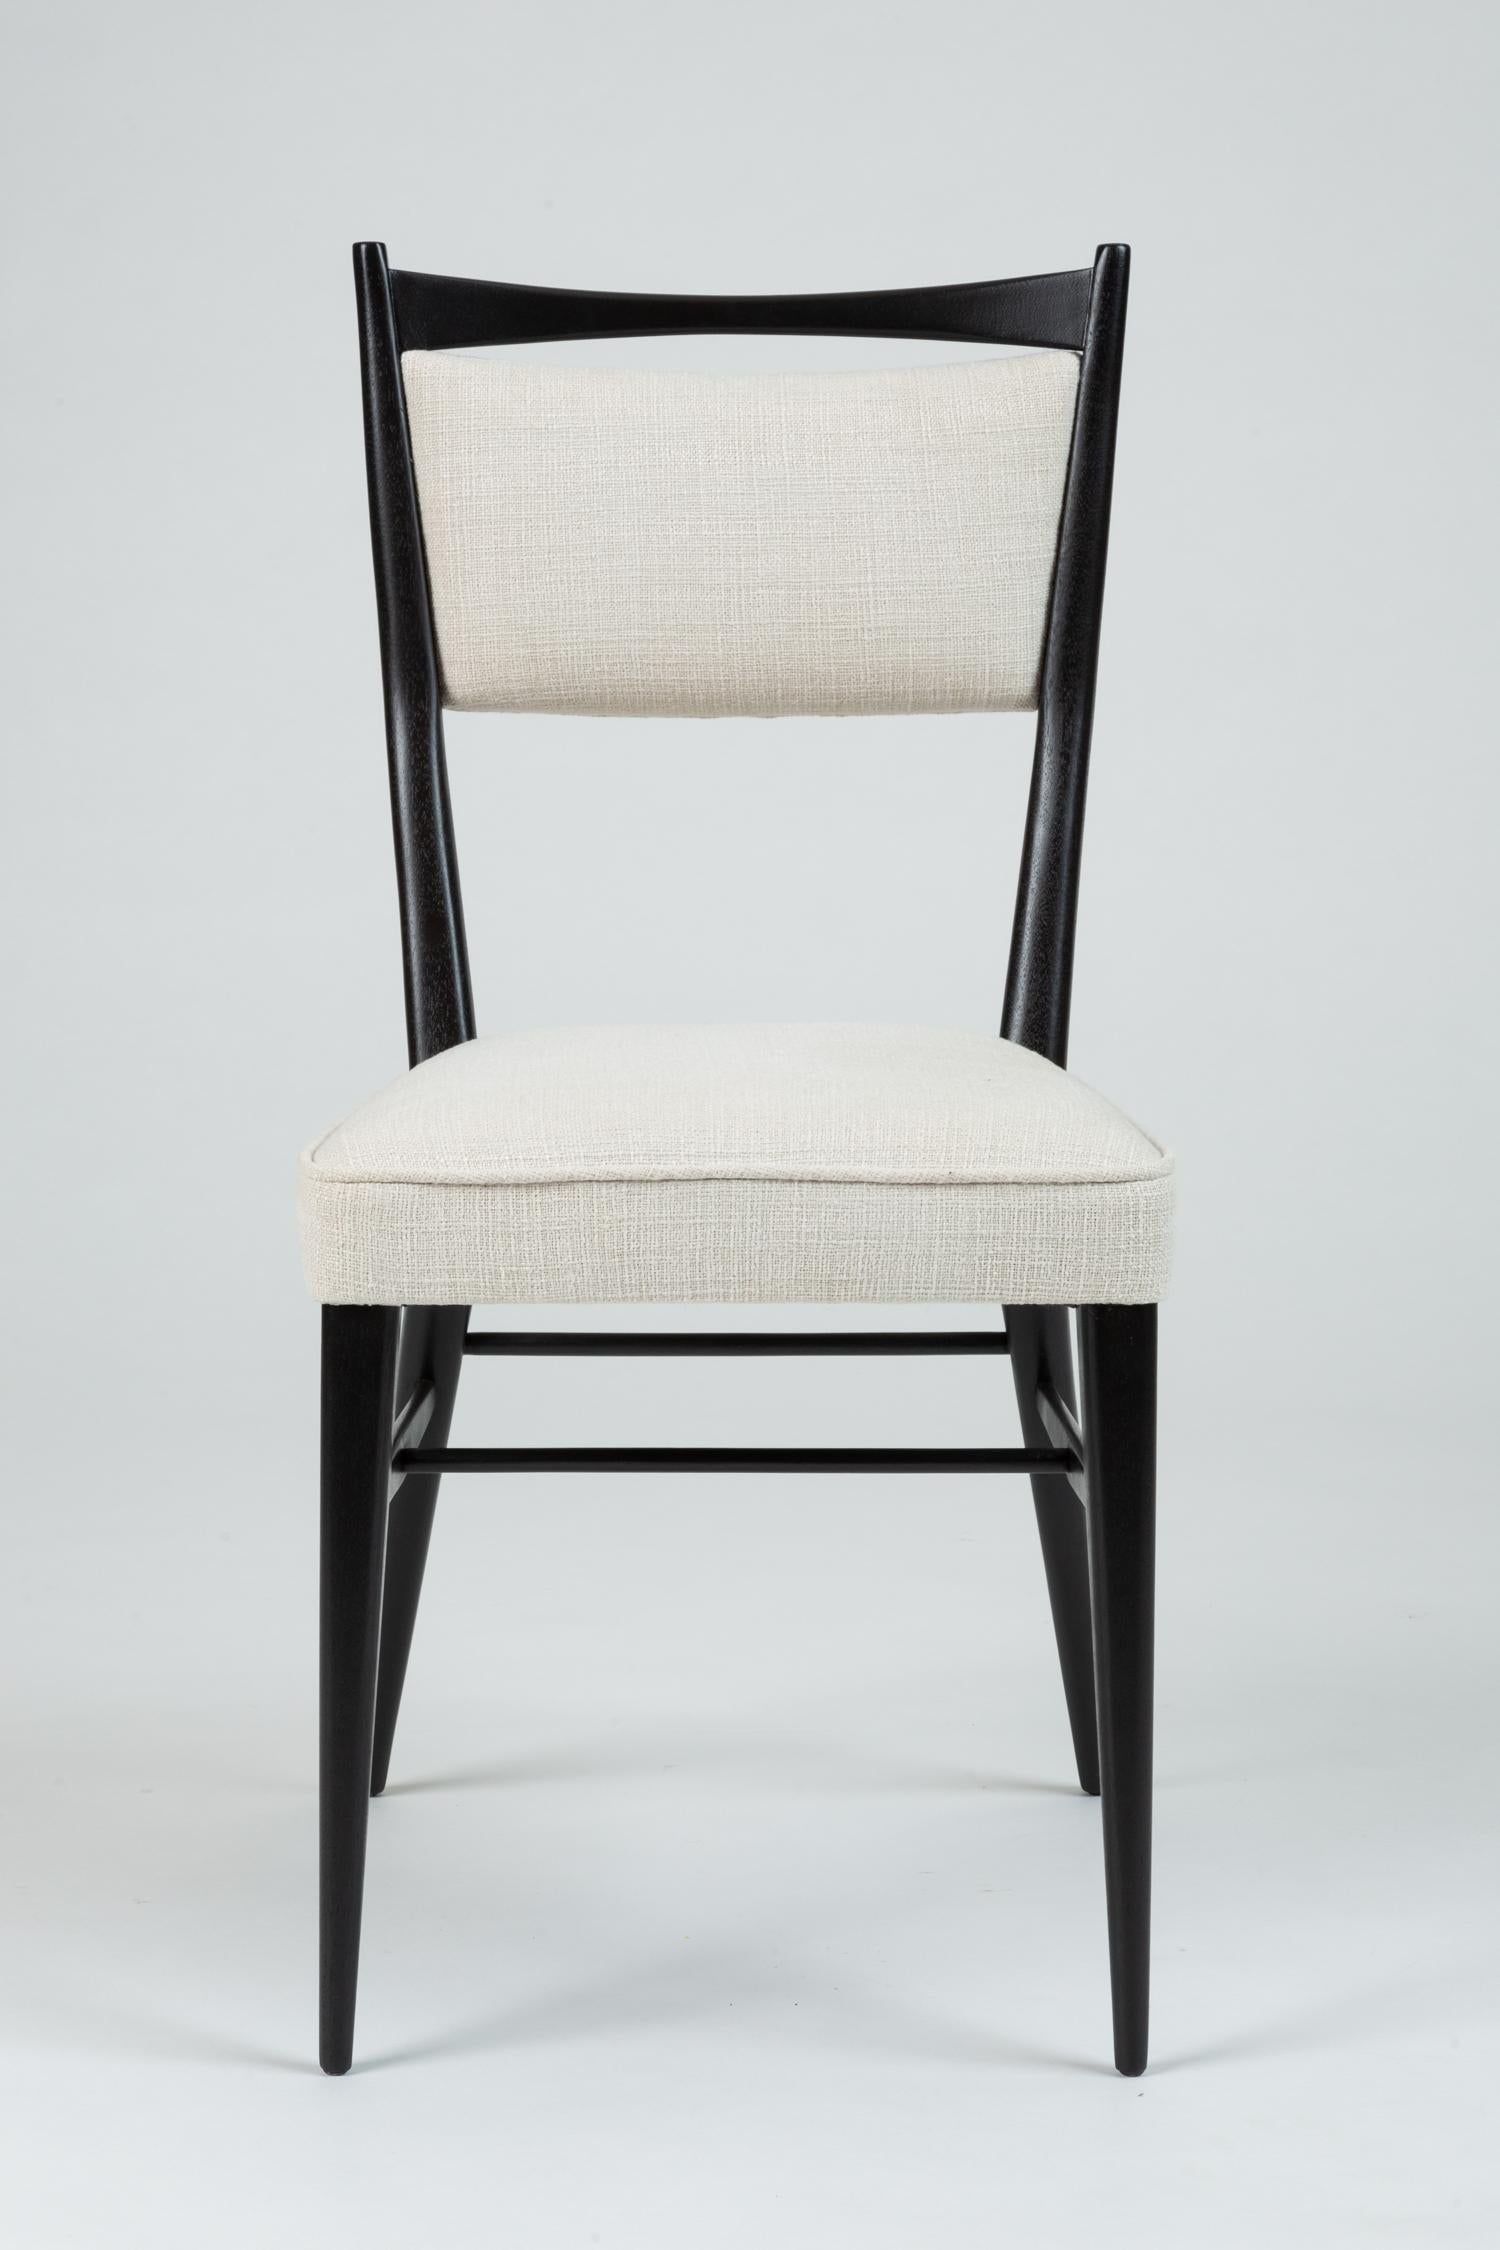 Classic American modernist lines are showcased in this single accent chair by Paul McCobb for H. Sacks and Sons. Designed as a dining chair for the 1953 Connoisseur Collection, the piece has an angular construction with a tapering backrest and